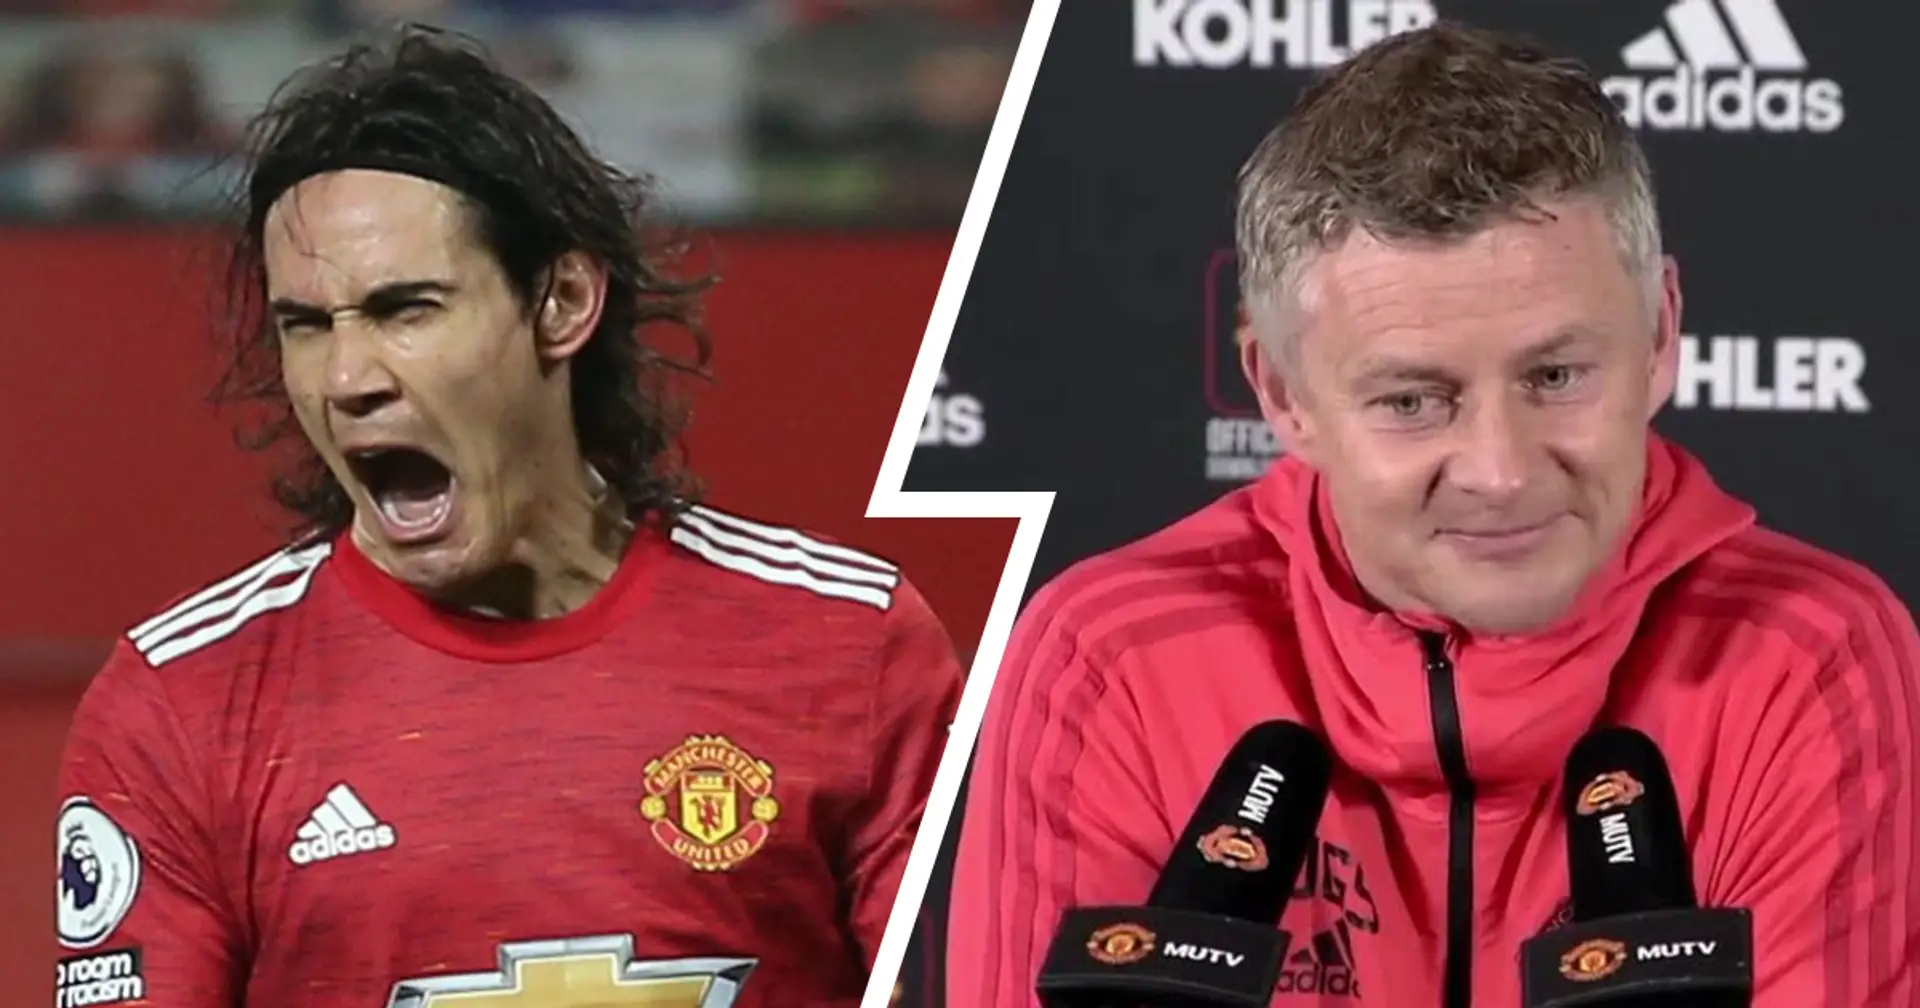 Ole Gunnar Solskjaer reveals conversation with 2 former United players that helped convince him to sign Edinson Cavani